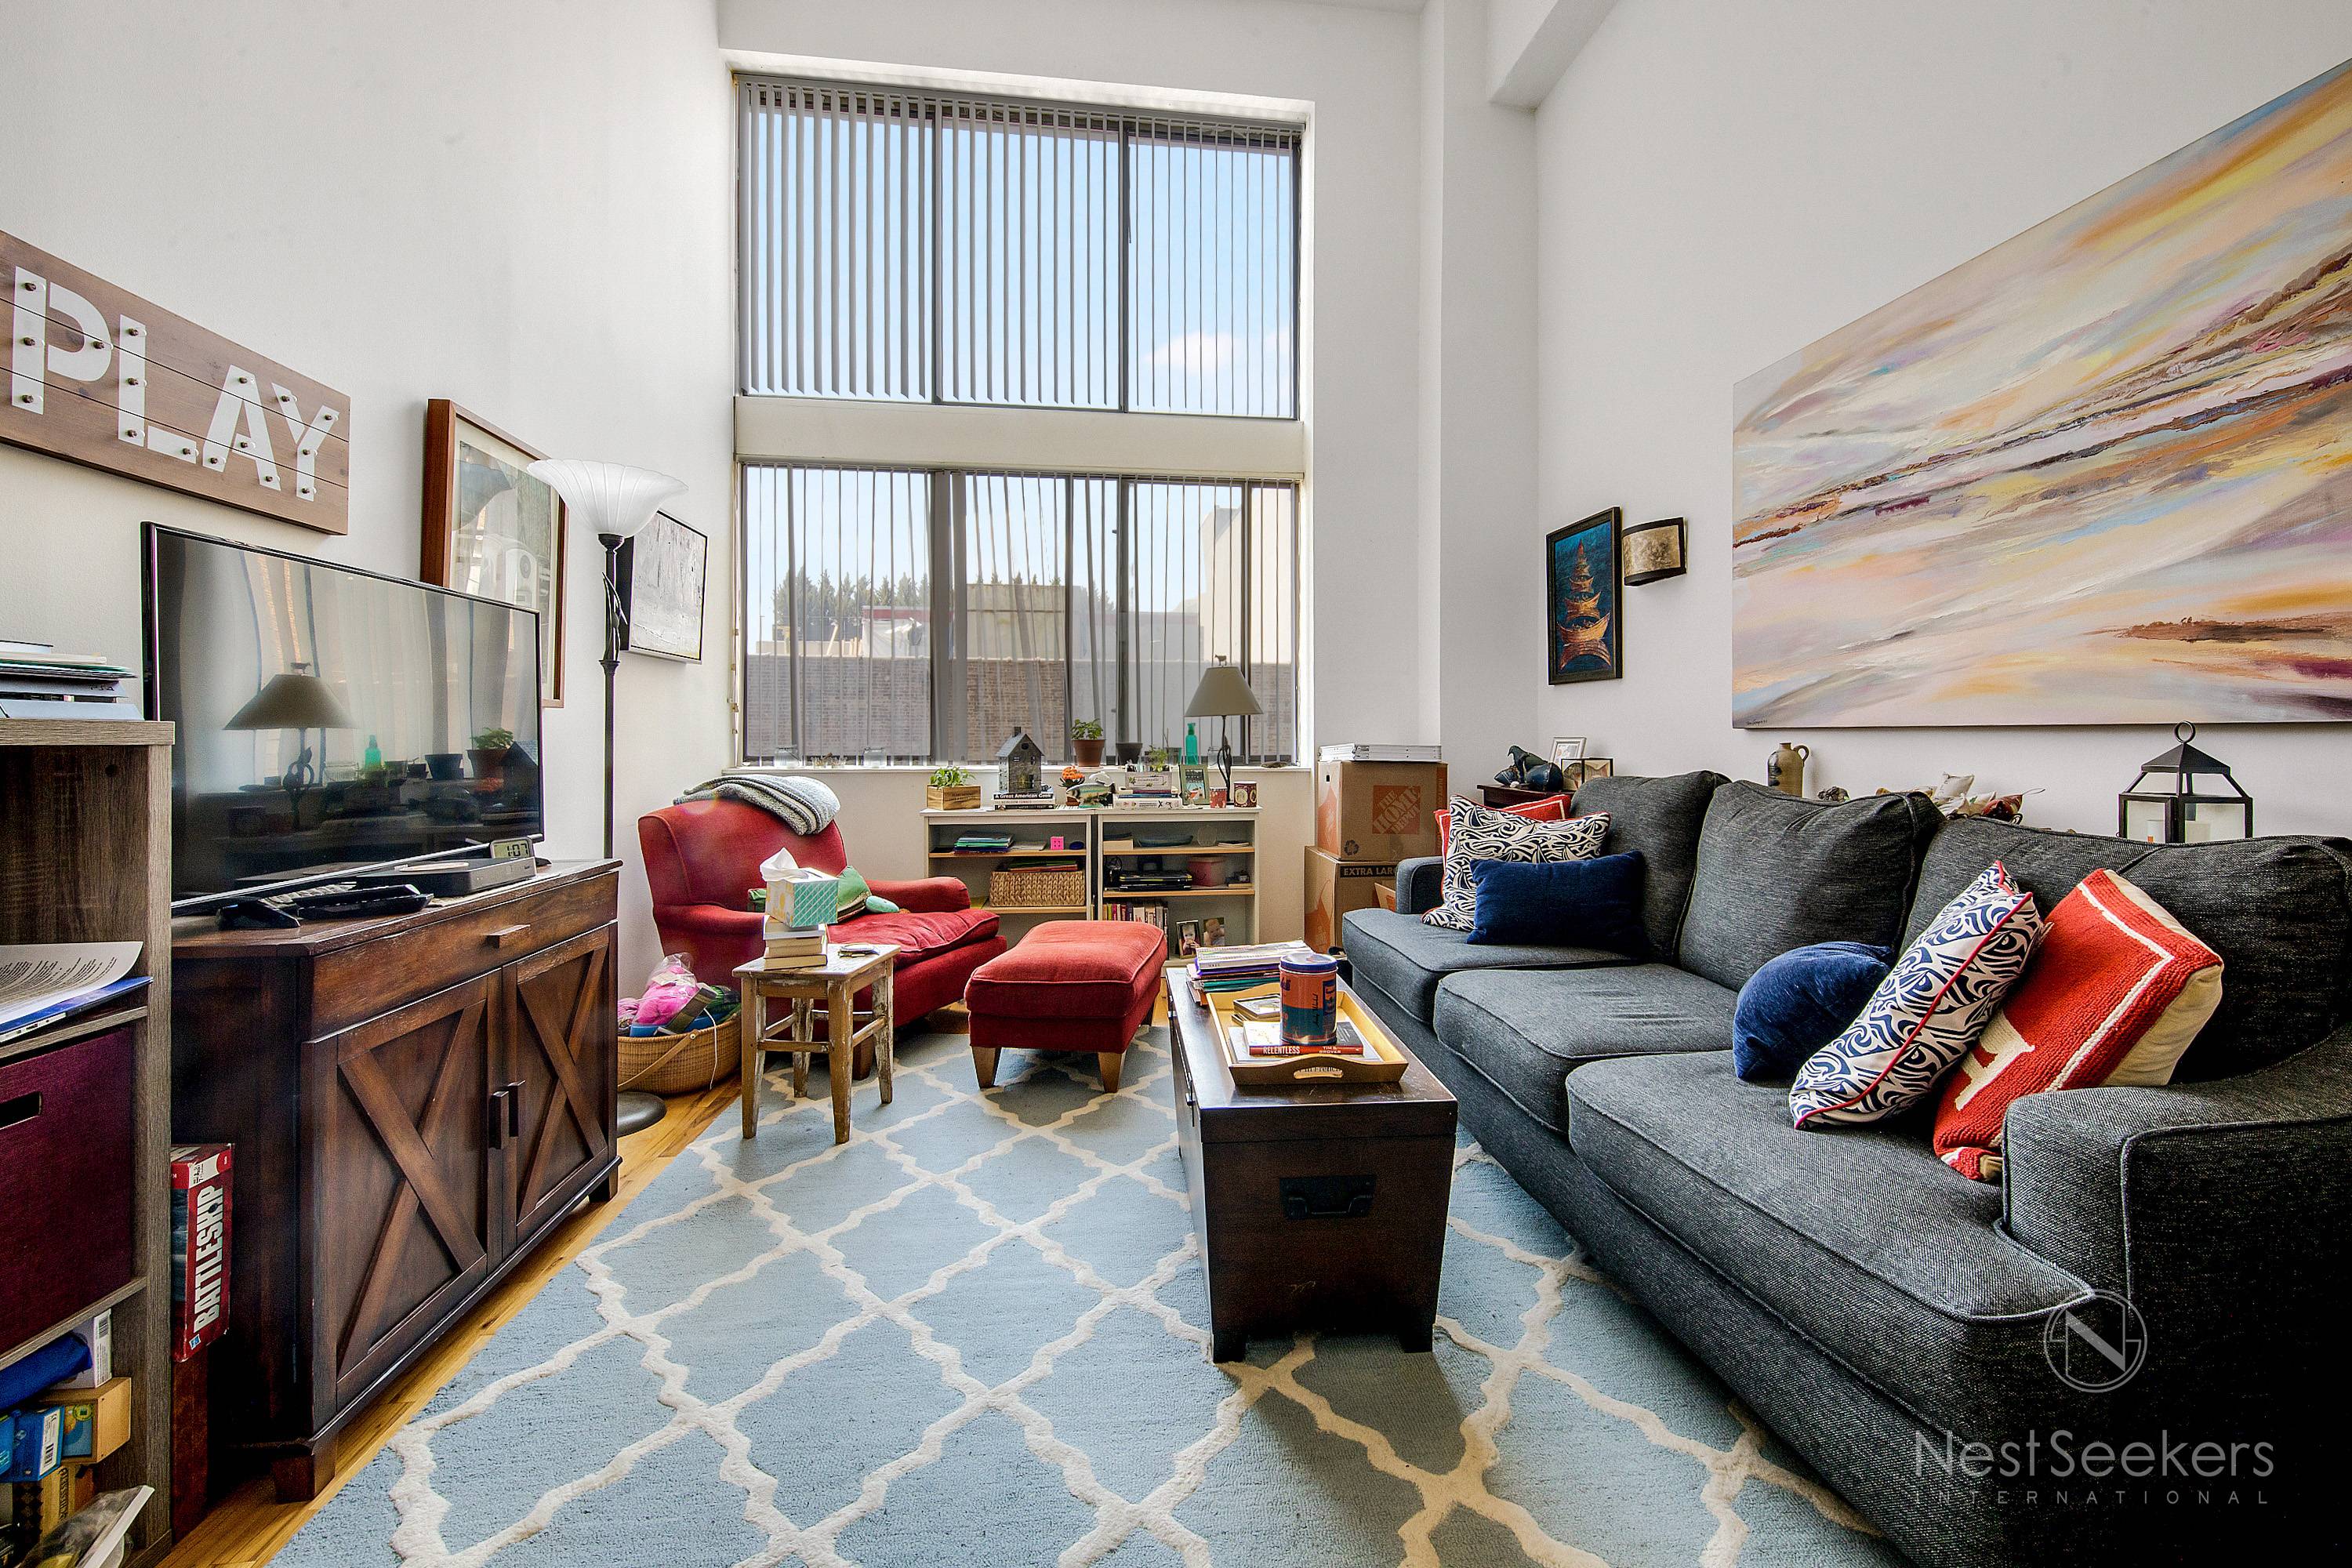 1BED|1BATH At the West Village Iconic Printing House